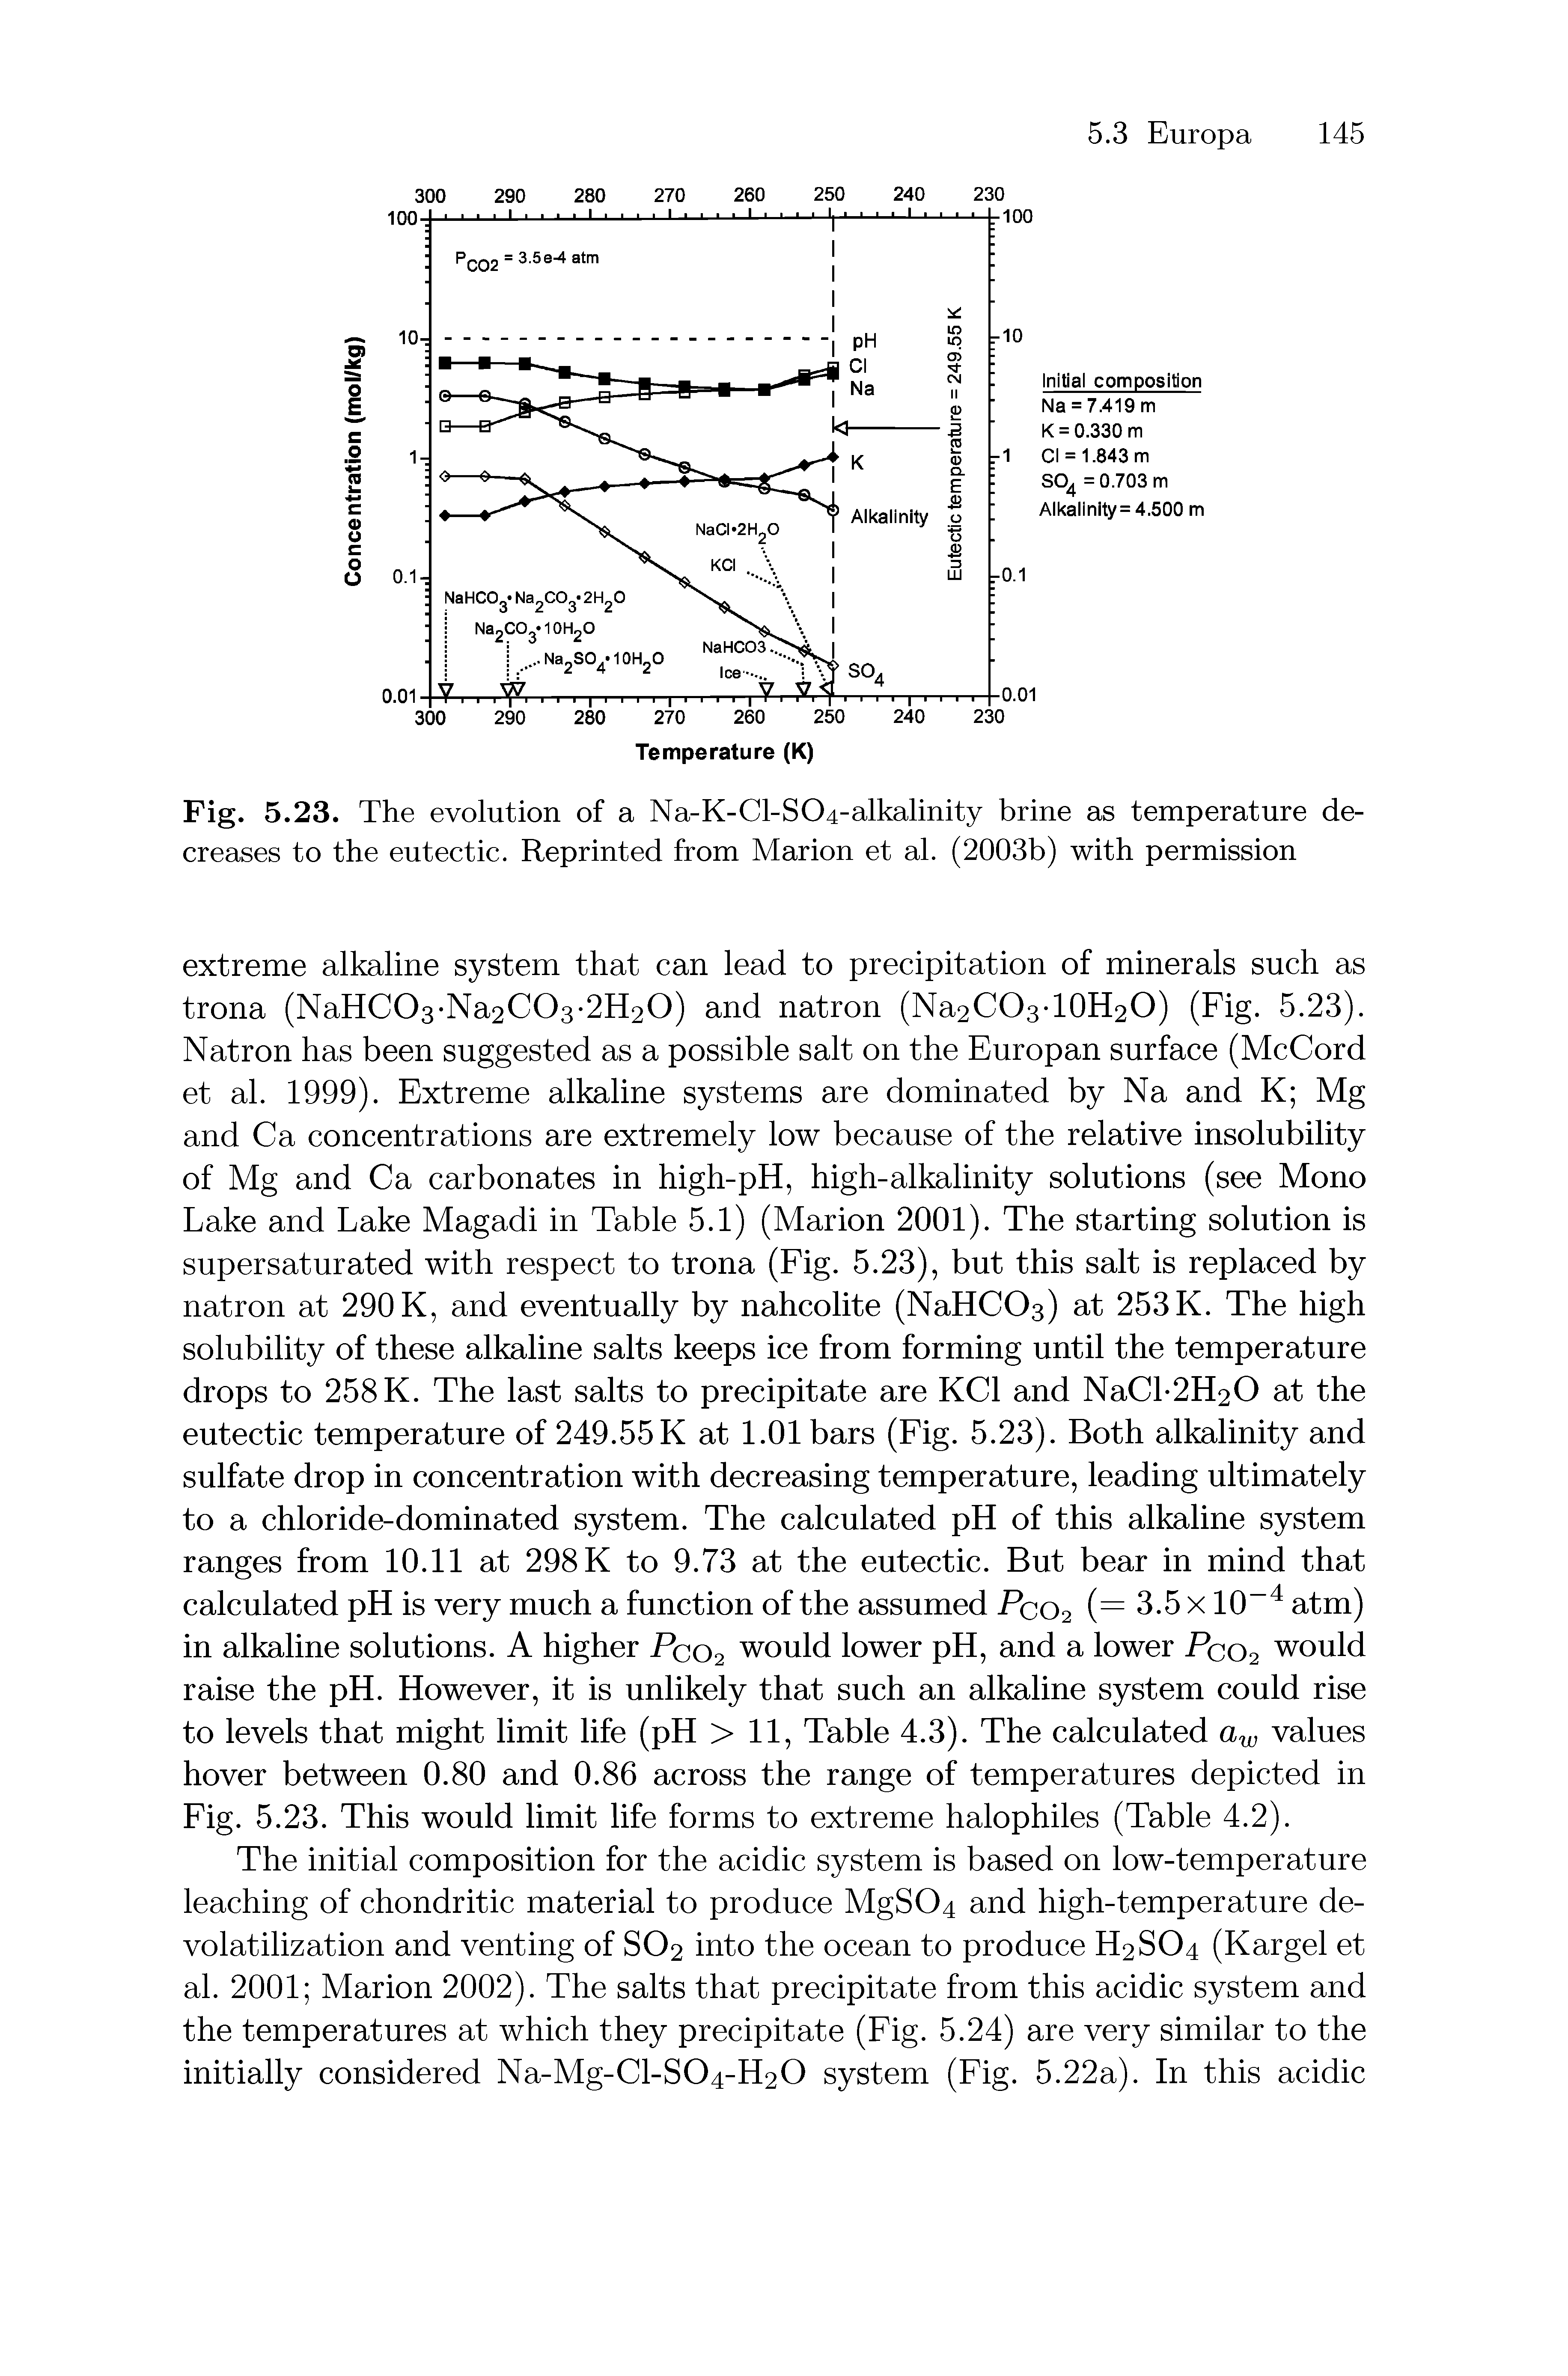 Fig. 5.23. The evolution of a Na-K-Cl-SO4-alkalinity brine as temperature decreases to the eutectic. Reprinted from Marion et al. (2003b) with permission...